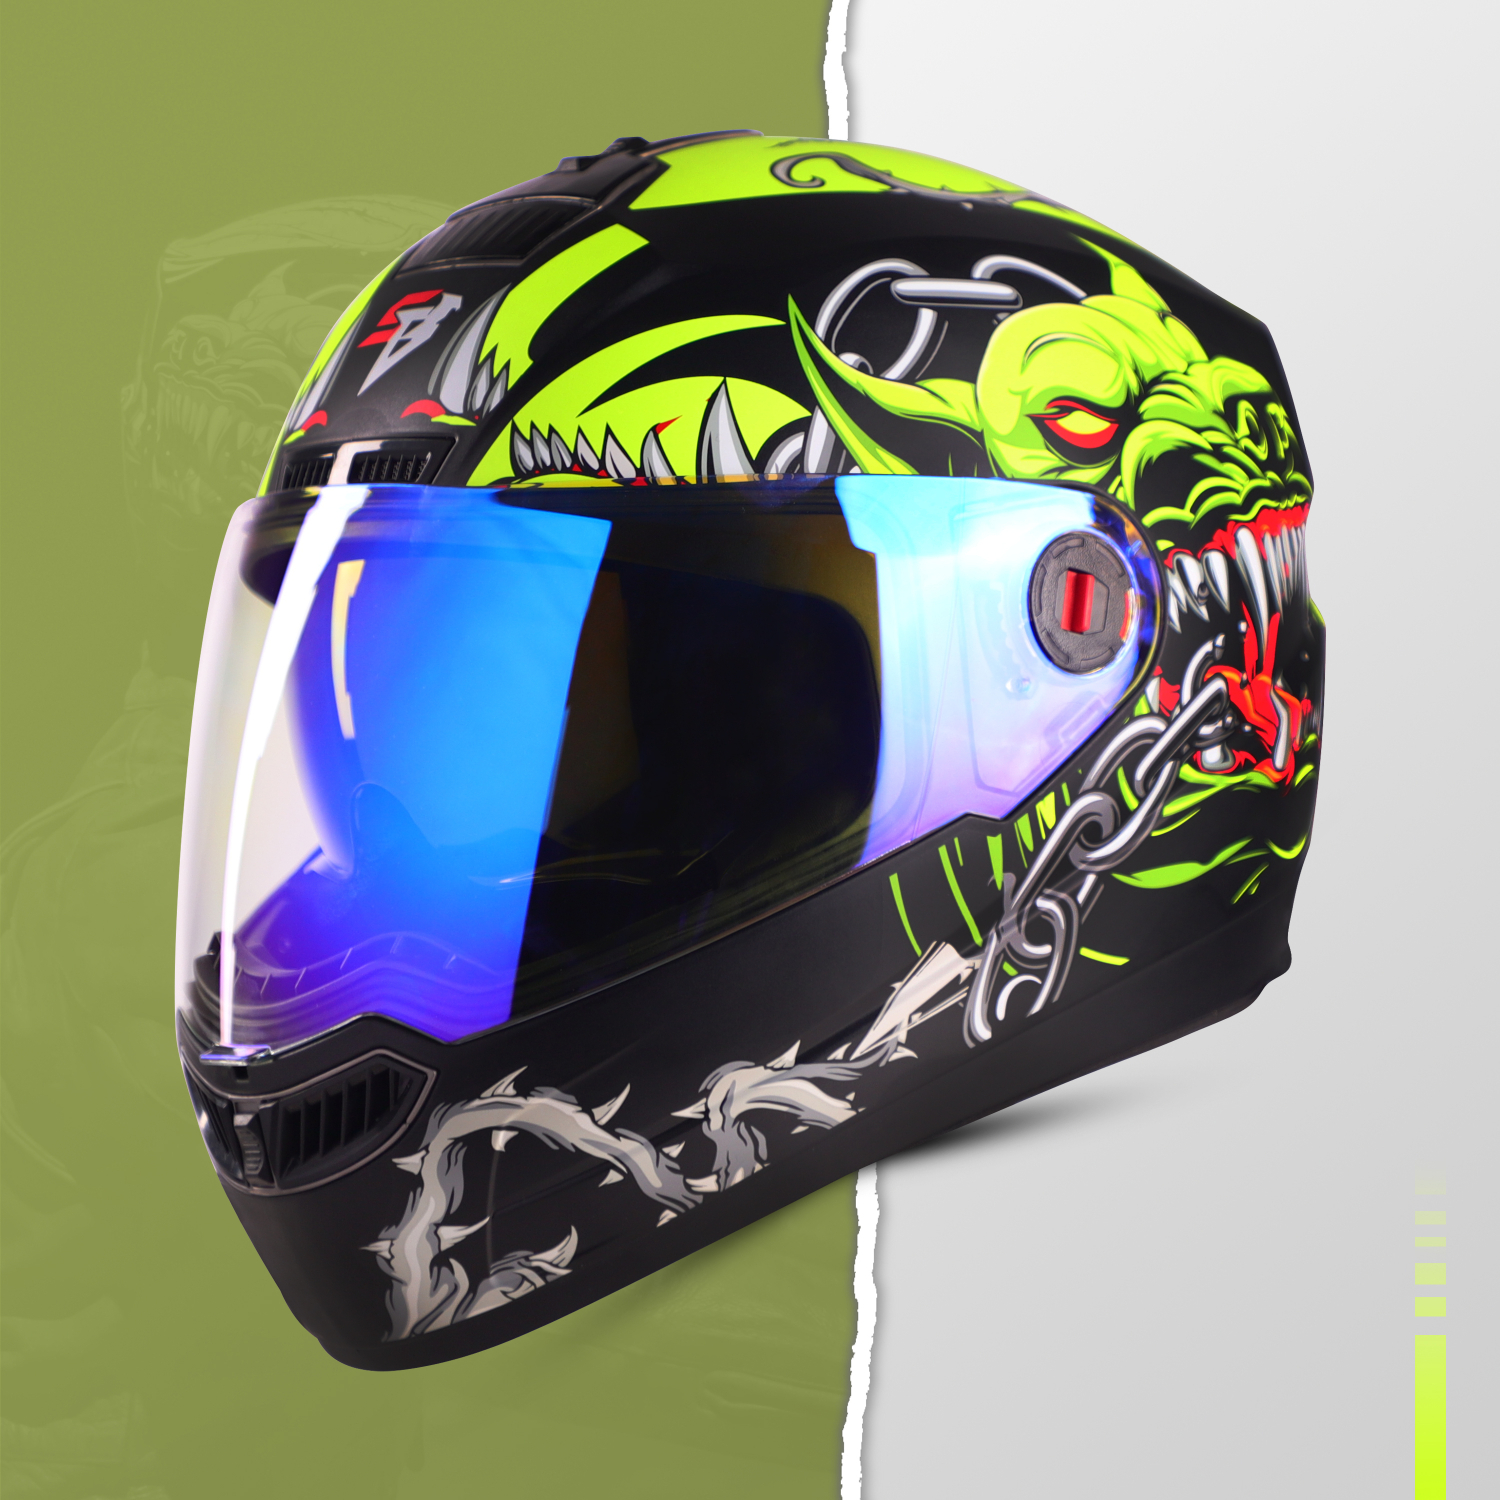 Steelbird SBA-1 Angry Dog ISI Certified Full Face Graphic Helmet For Men And Women With Inner Smoke Sun Shield (Glossy Black Neon With Night Vision Blue Visor)